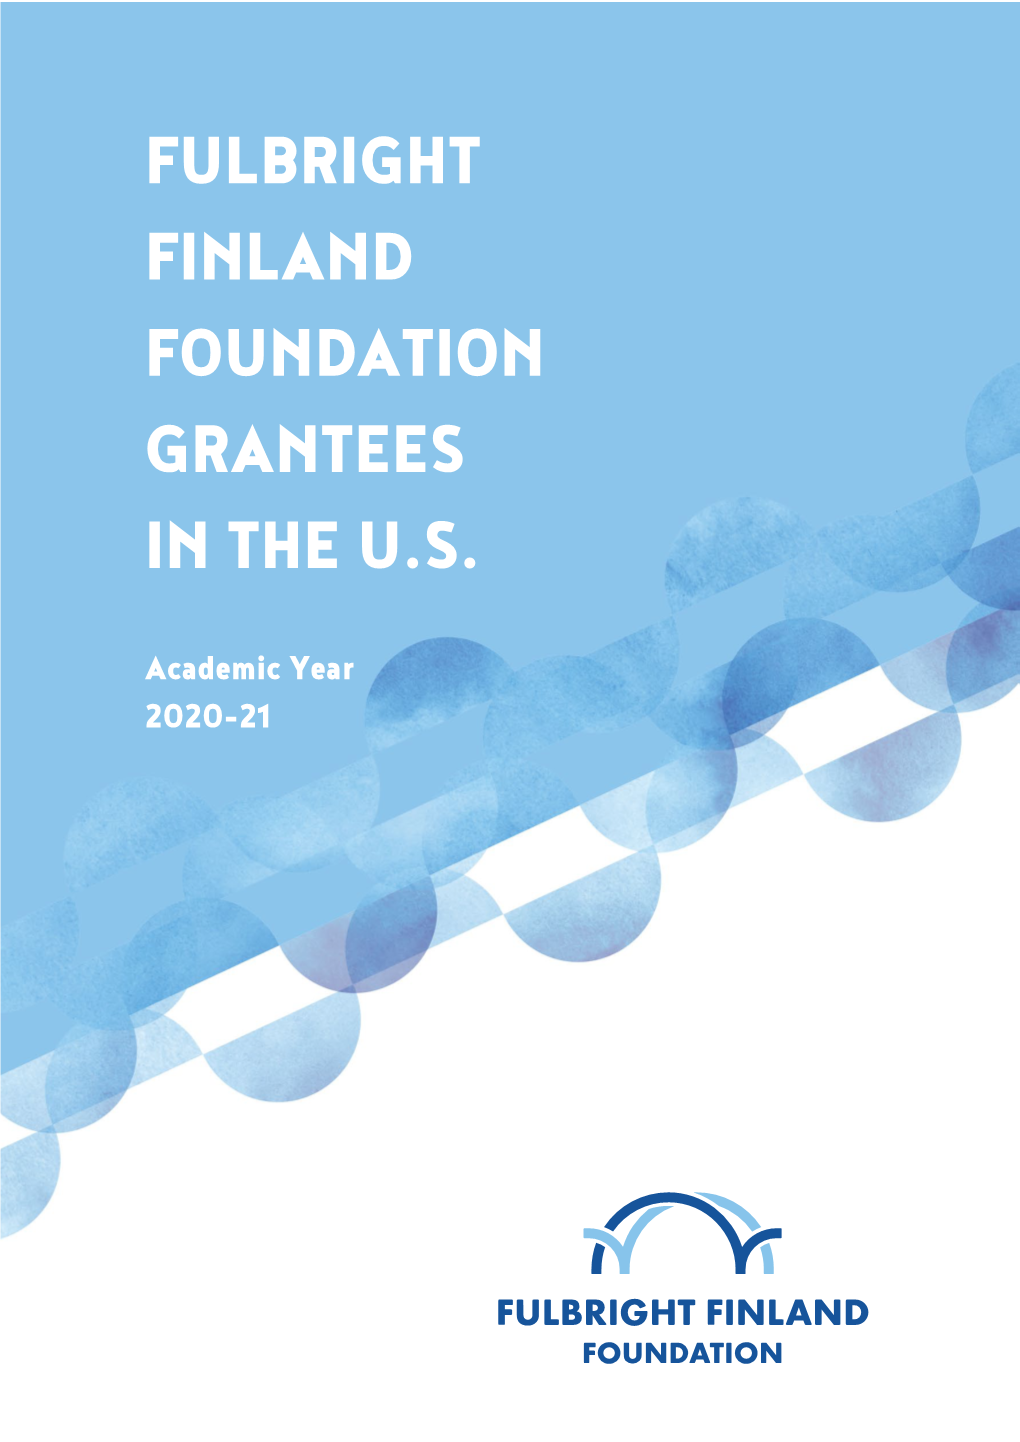 Fulbright Finland Foundation Grantees in the U.S